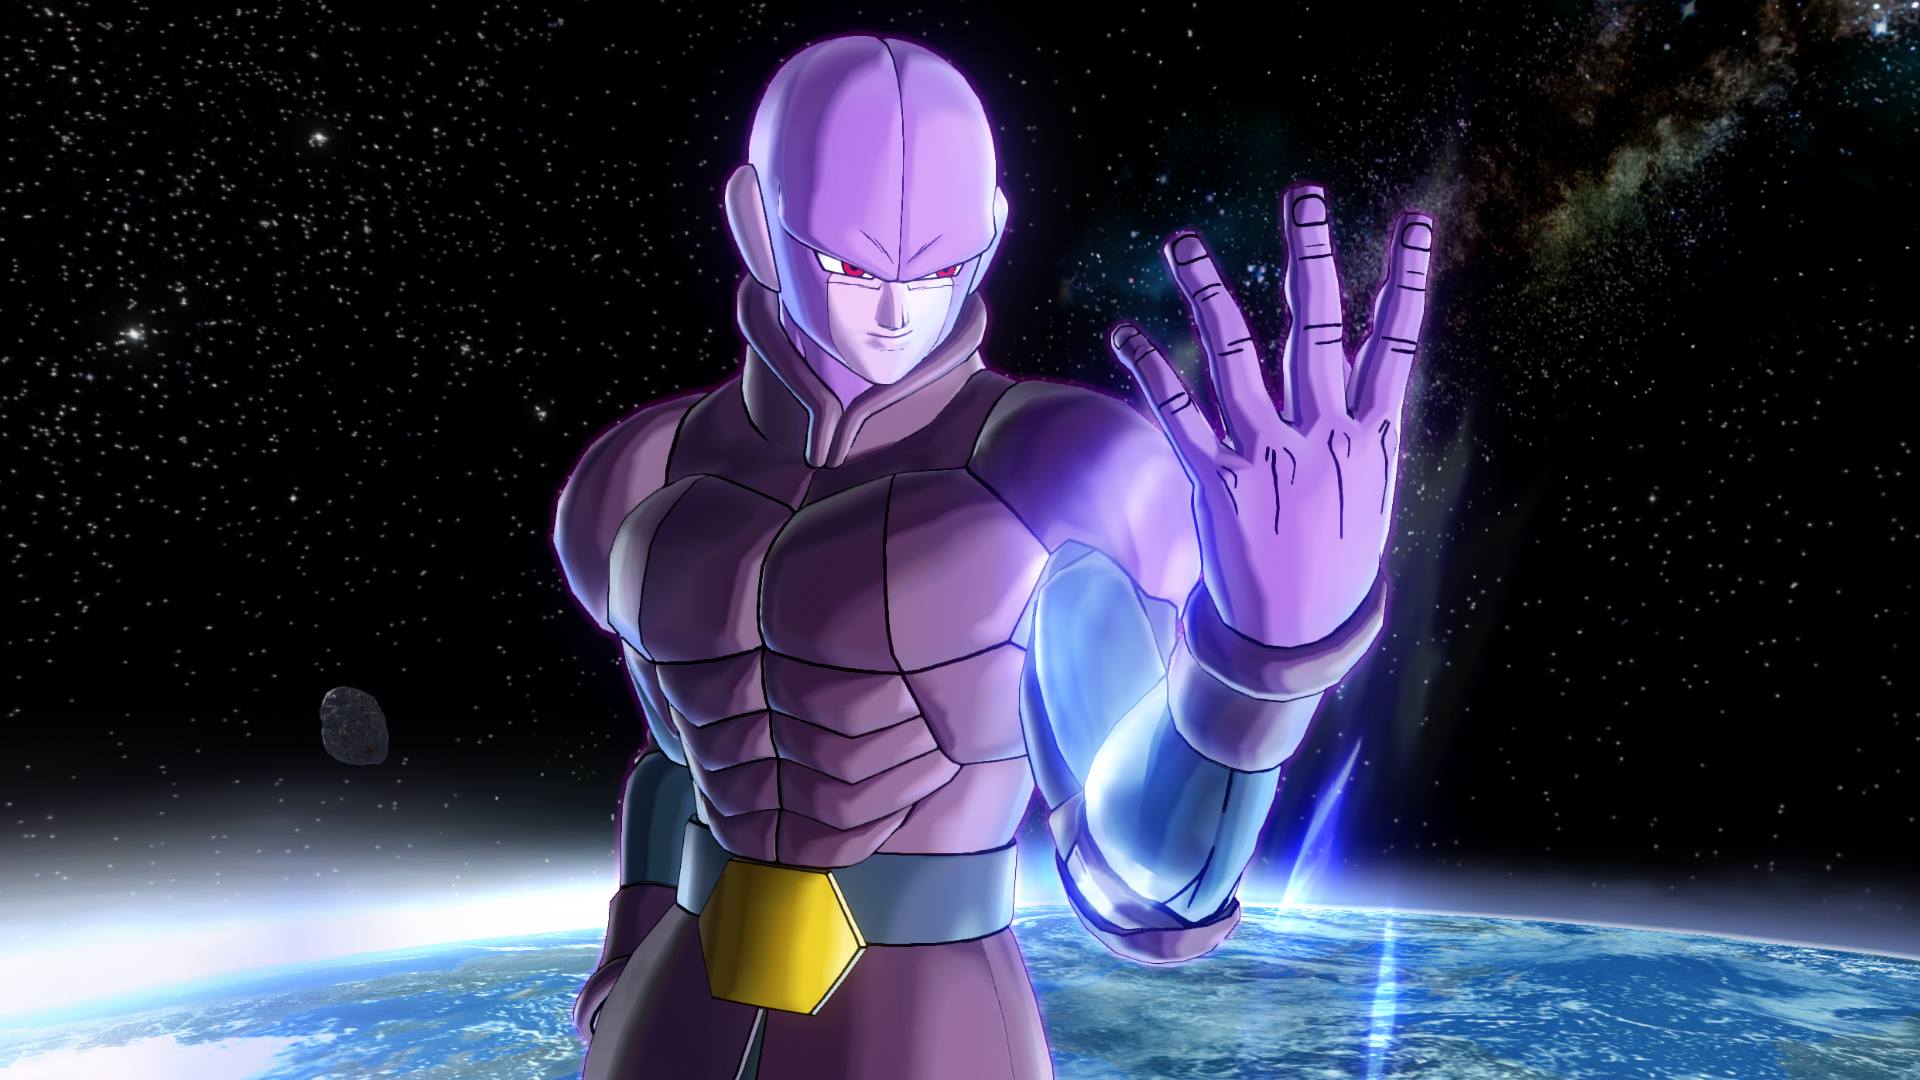 dbz xenoverse 2 switch all characters